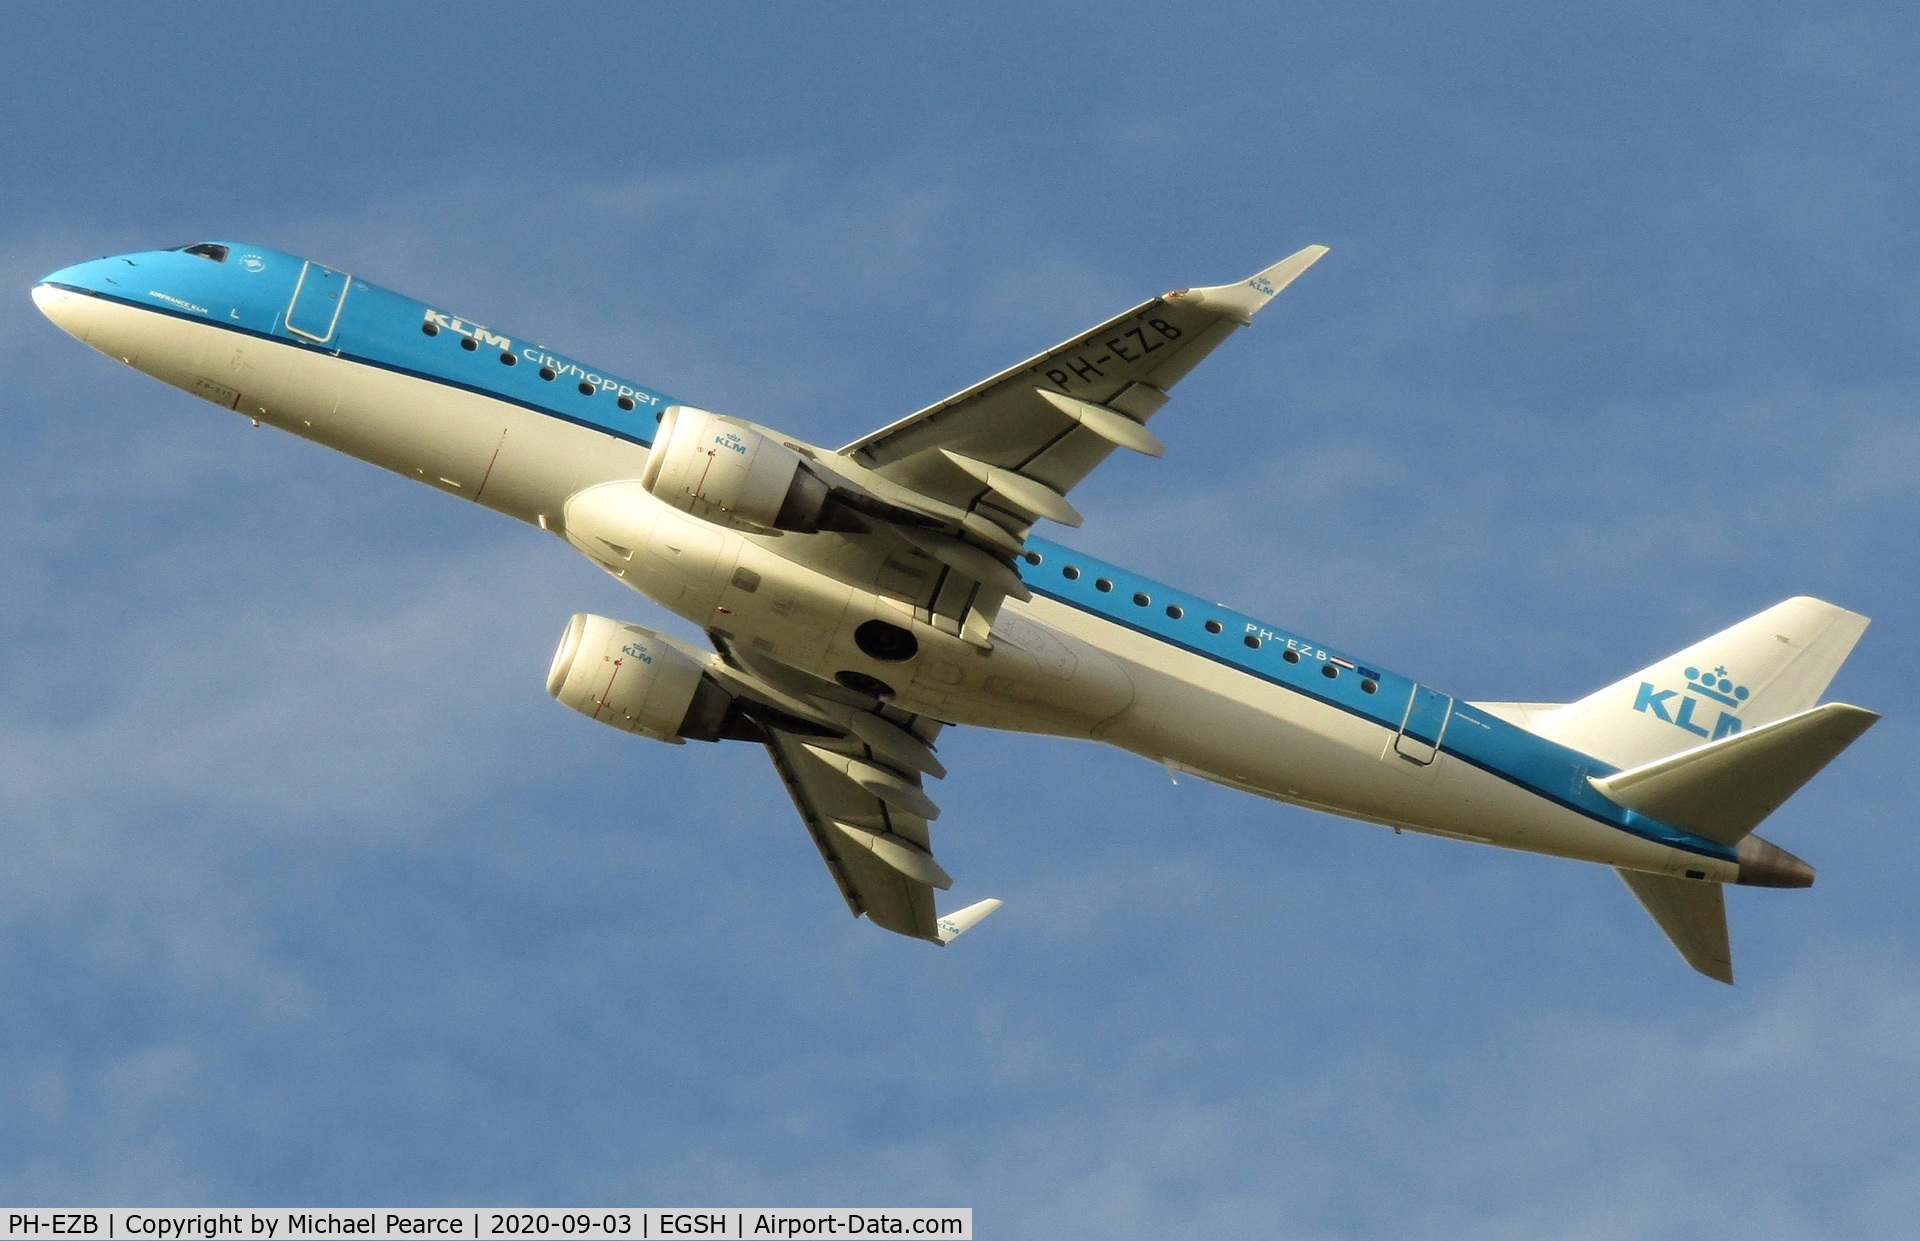 PH-EZB, 2008 Embraer 190LR (ERJ-190-100LR) C/N 19000235, Climbing out of RWY 27 on departure to Amsterdam (AMS).